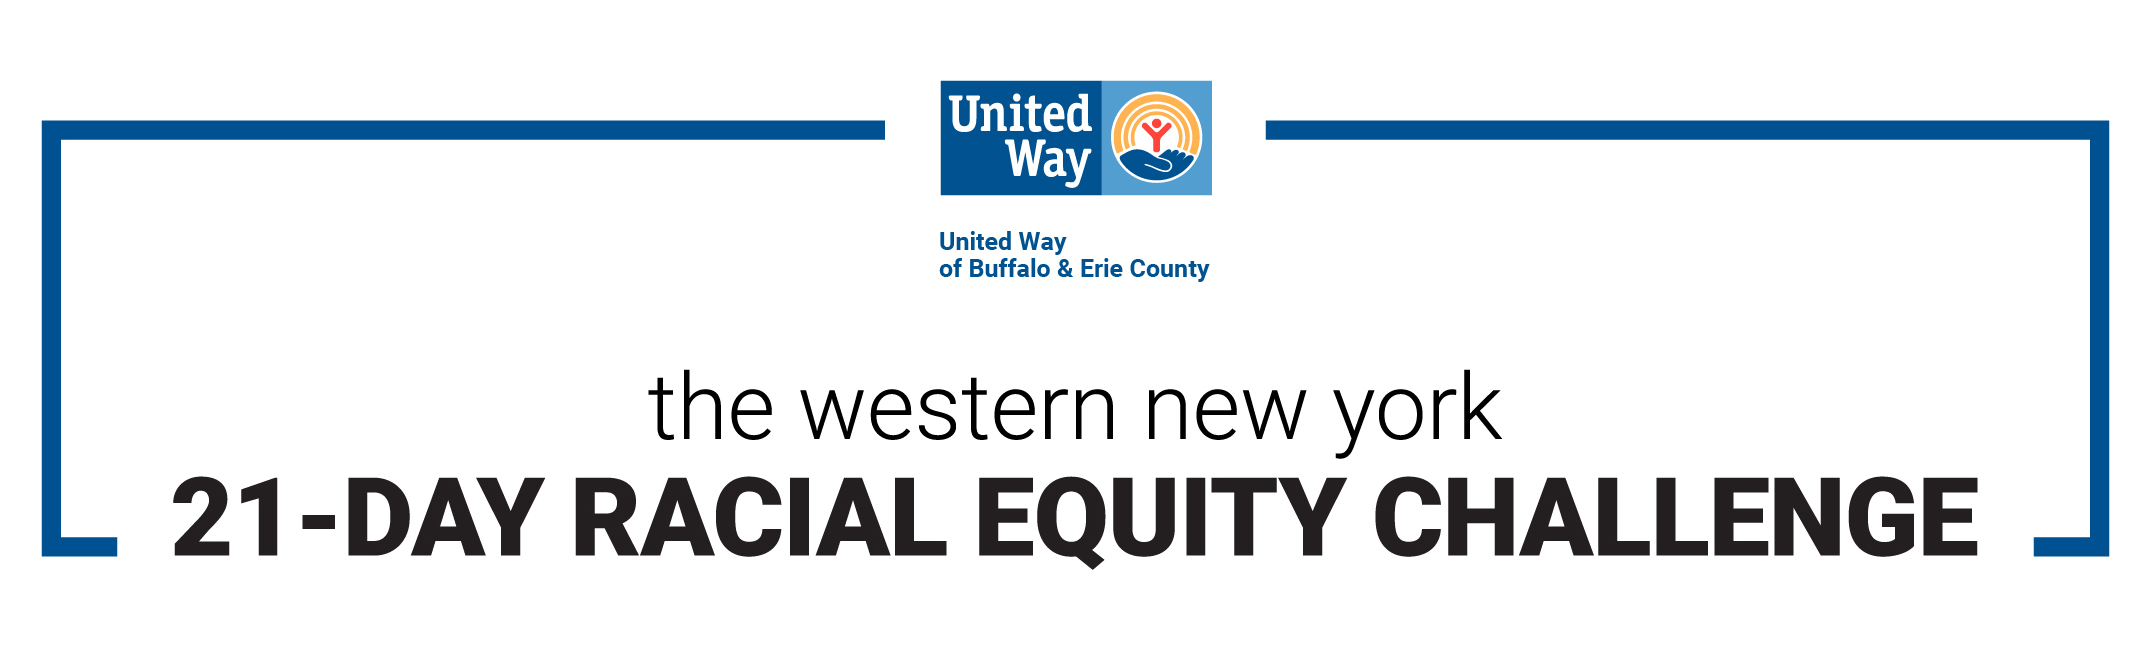 United Way 21-day Racial Equity Challenge 